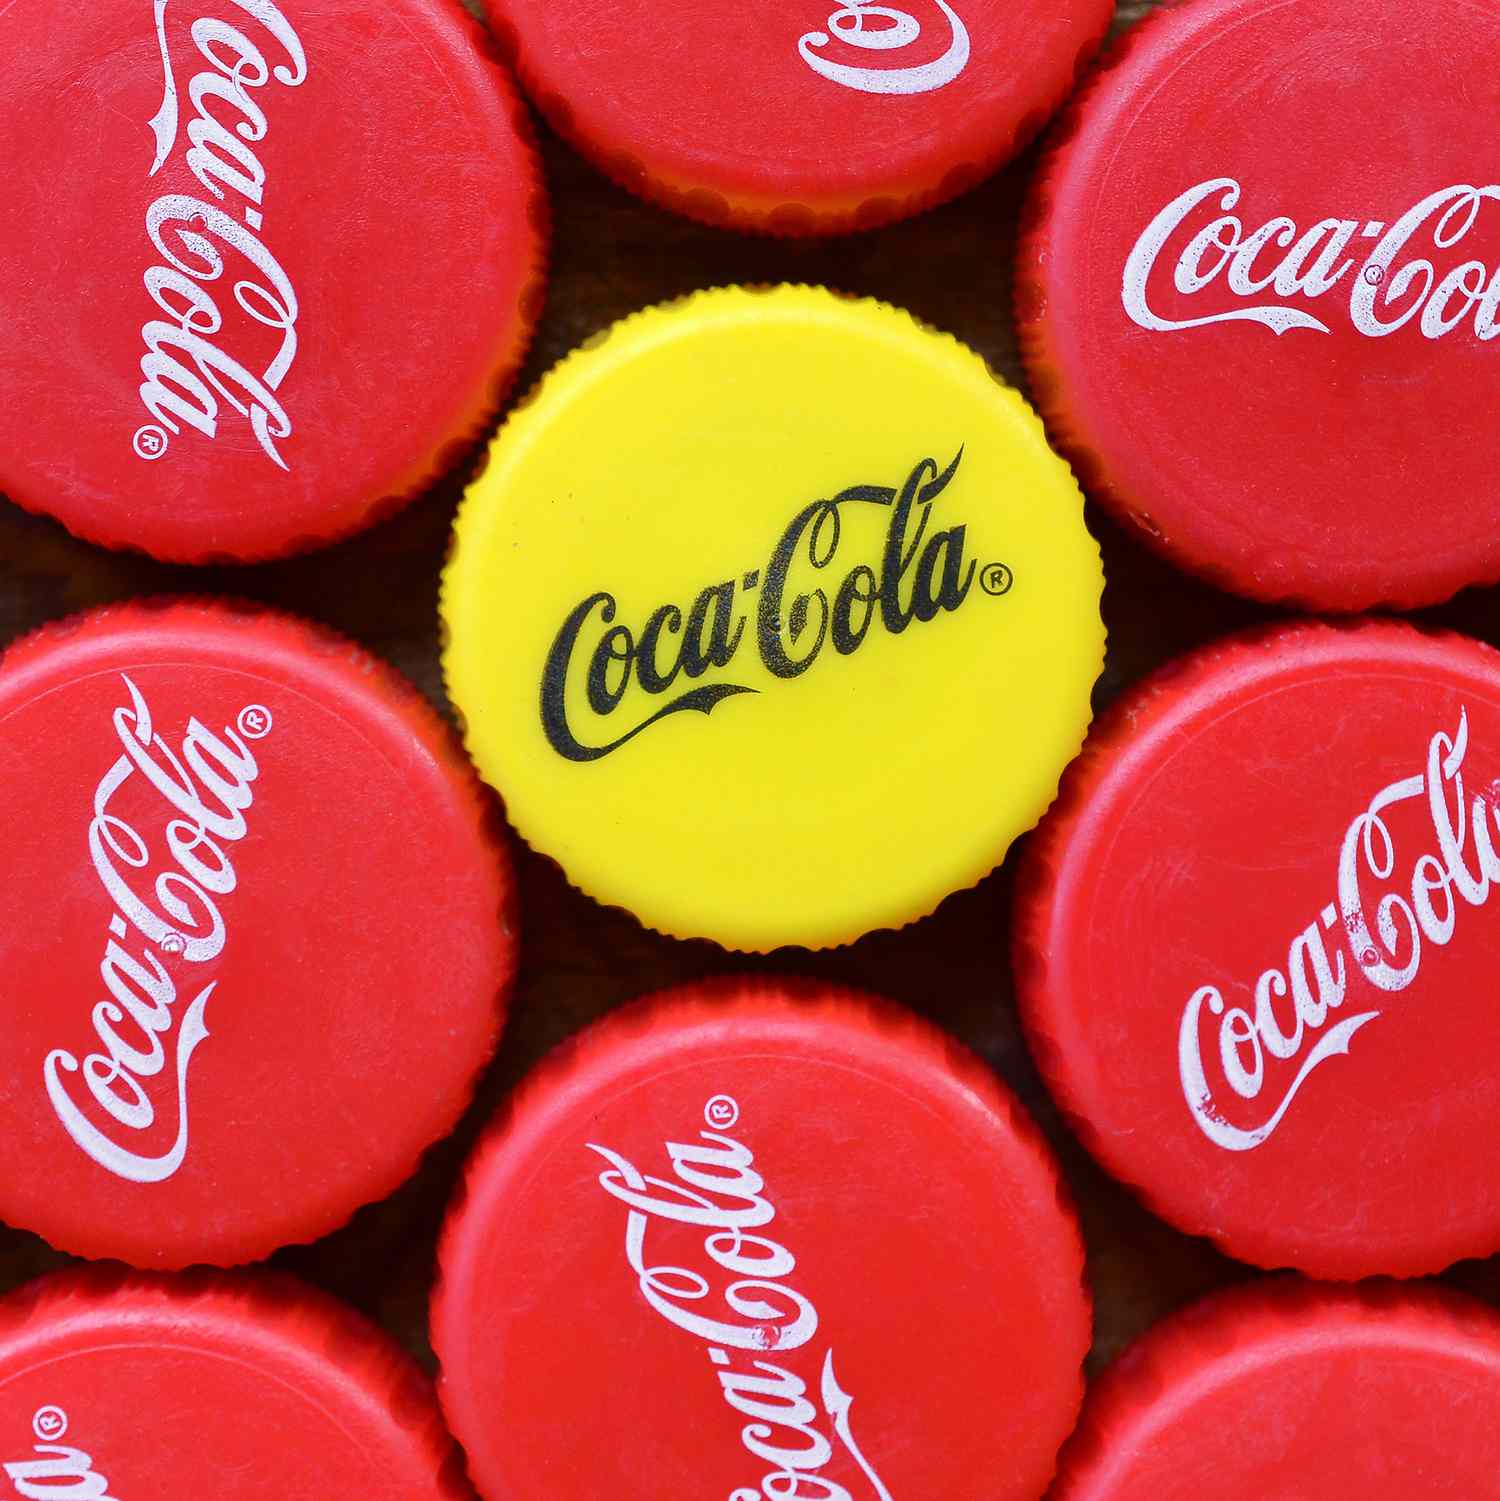 Many red lids and one yellow plastic cap with coca cola logo close up